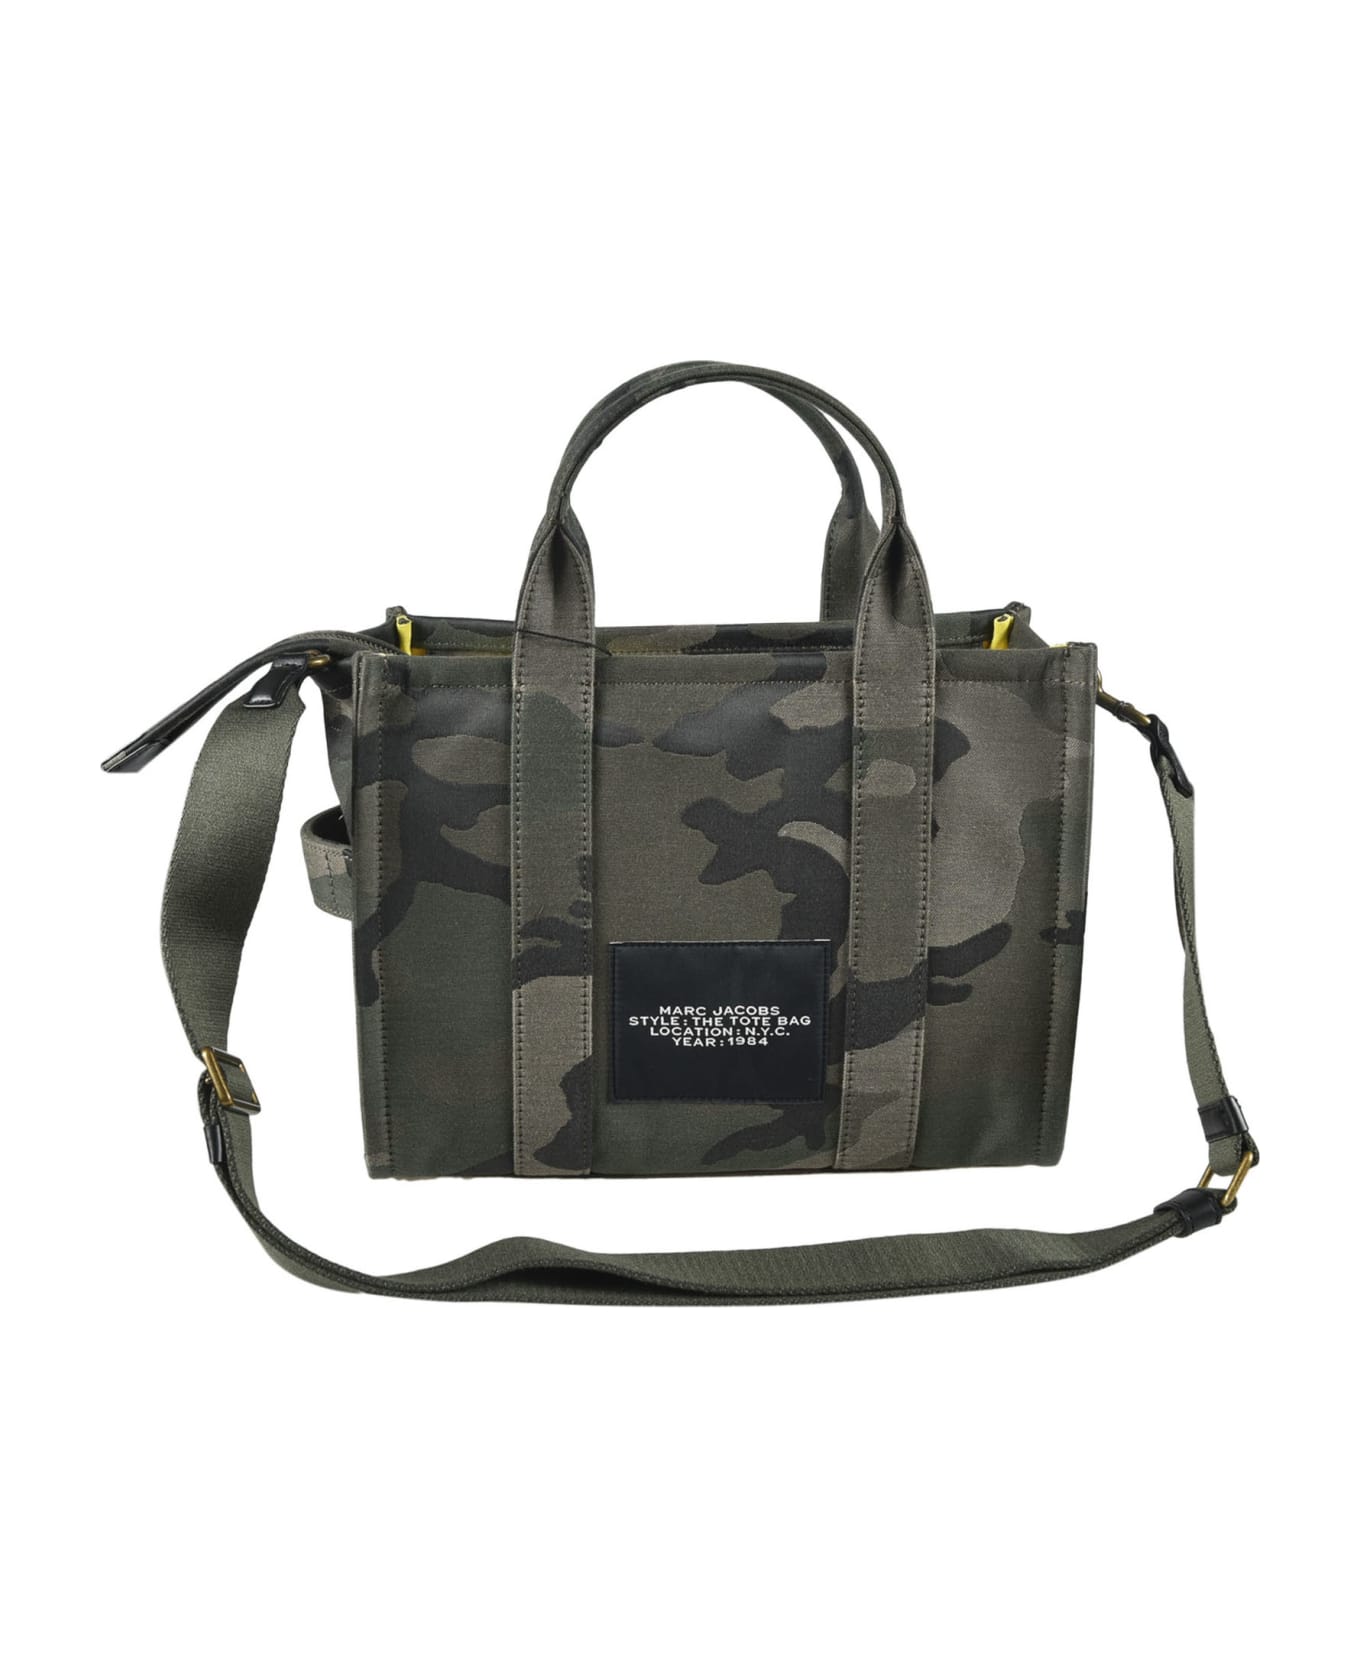 Marc Jacobs The Tote Bag Patched Tote - Camo/Multicolor トートバッグ